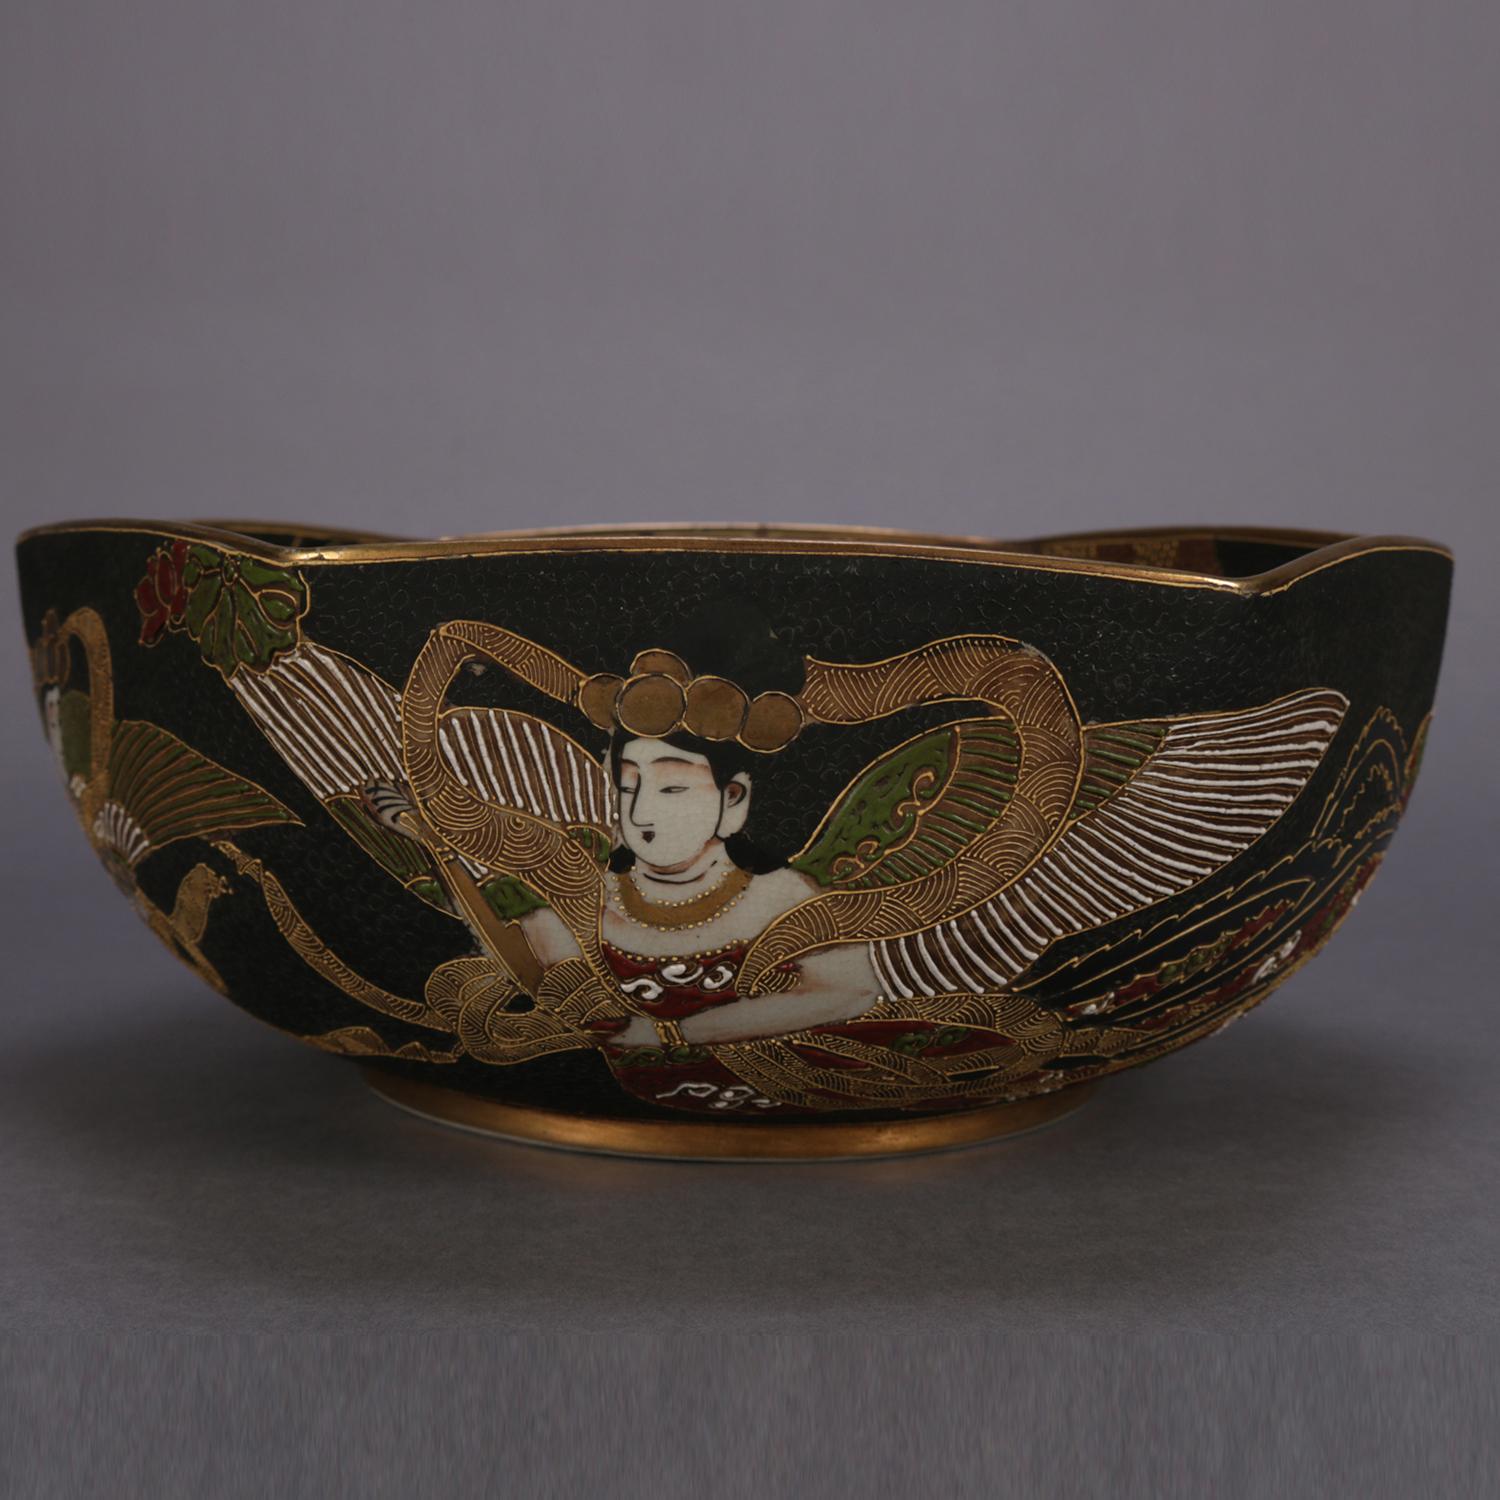 An antique and large Japanese Satsuma bas relief porcelain center bowl features scalloped rim with hand painted and gilt village scene with figures on interior and figures on exterior, chop mark signed on base as photographed, circa